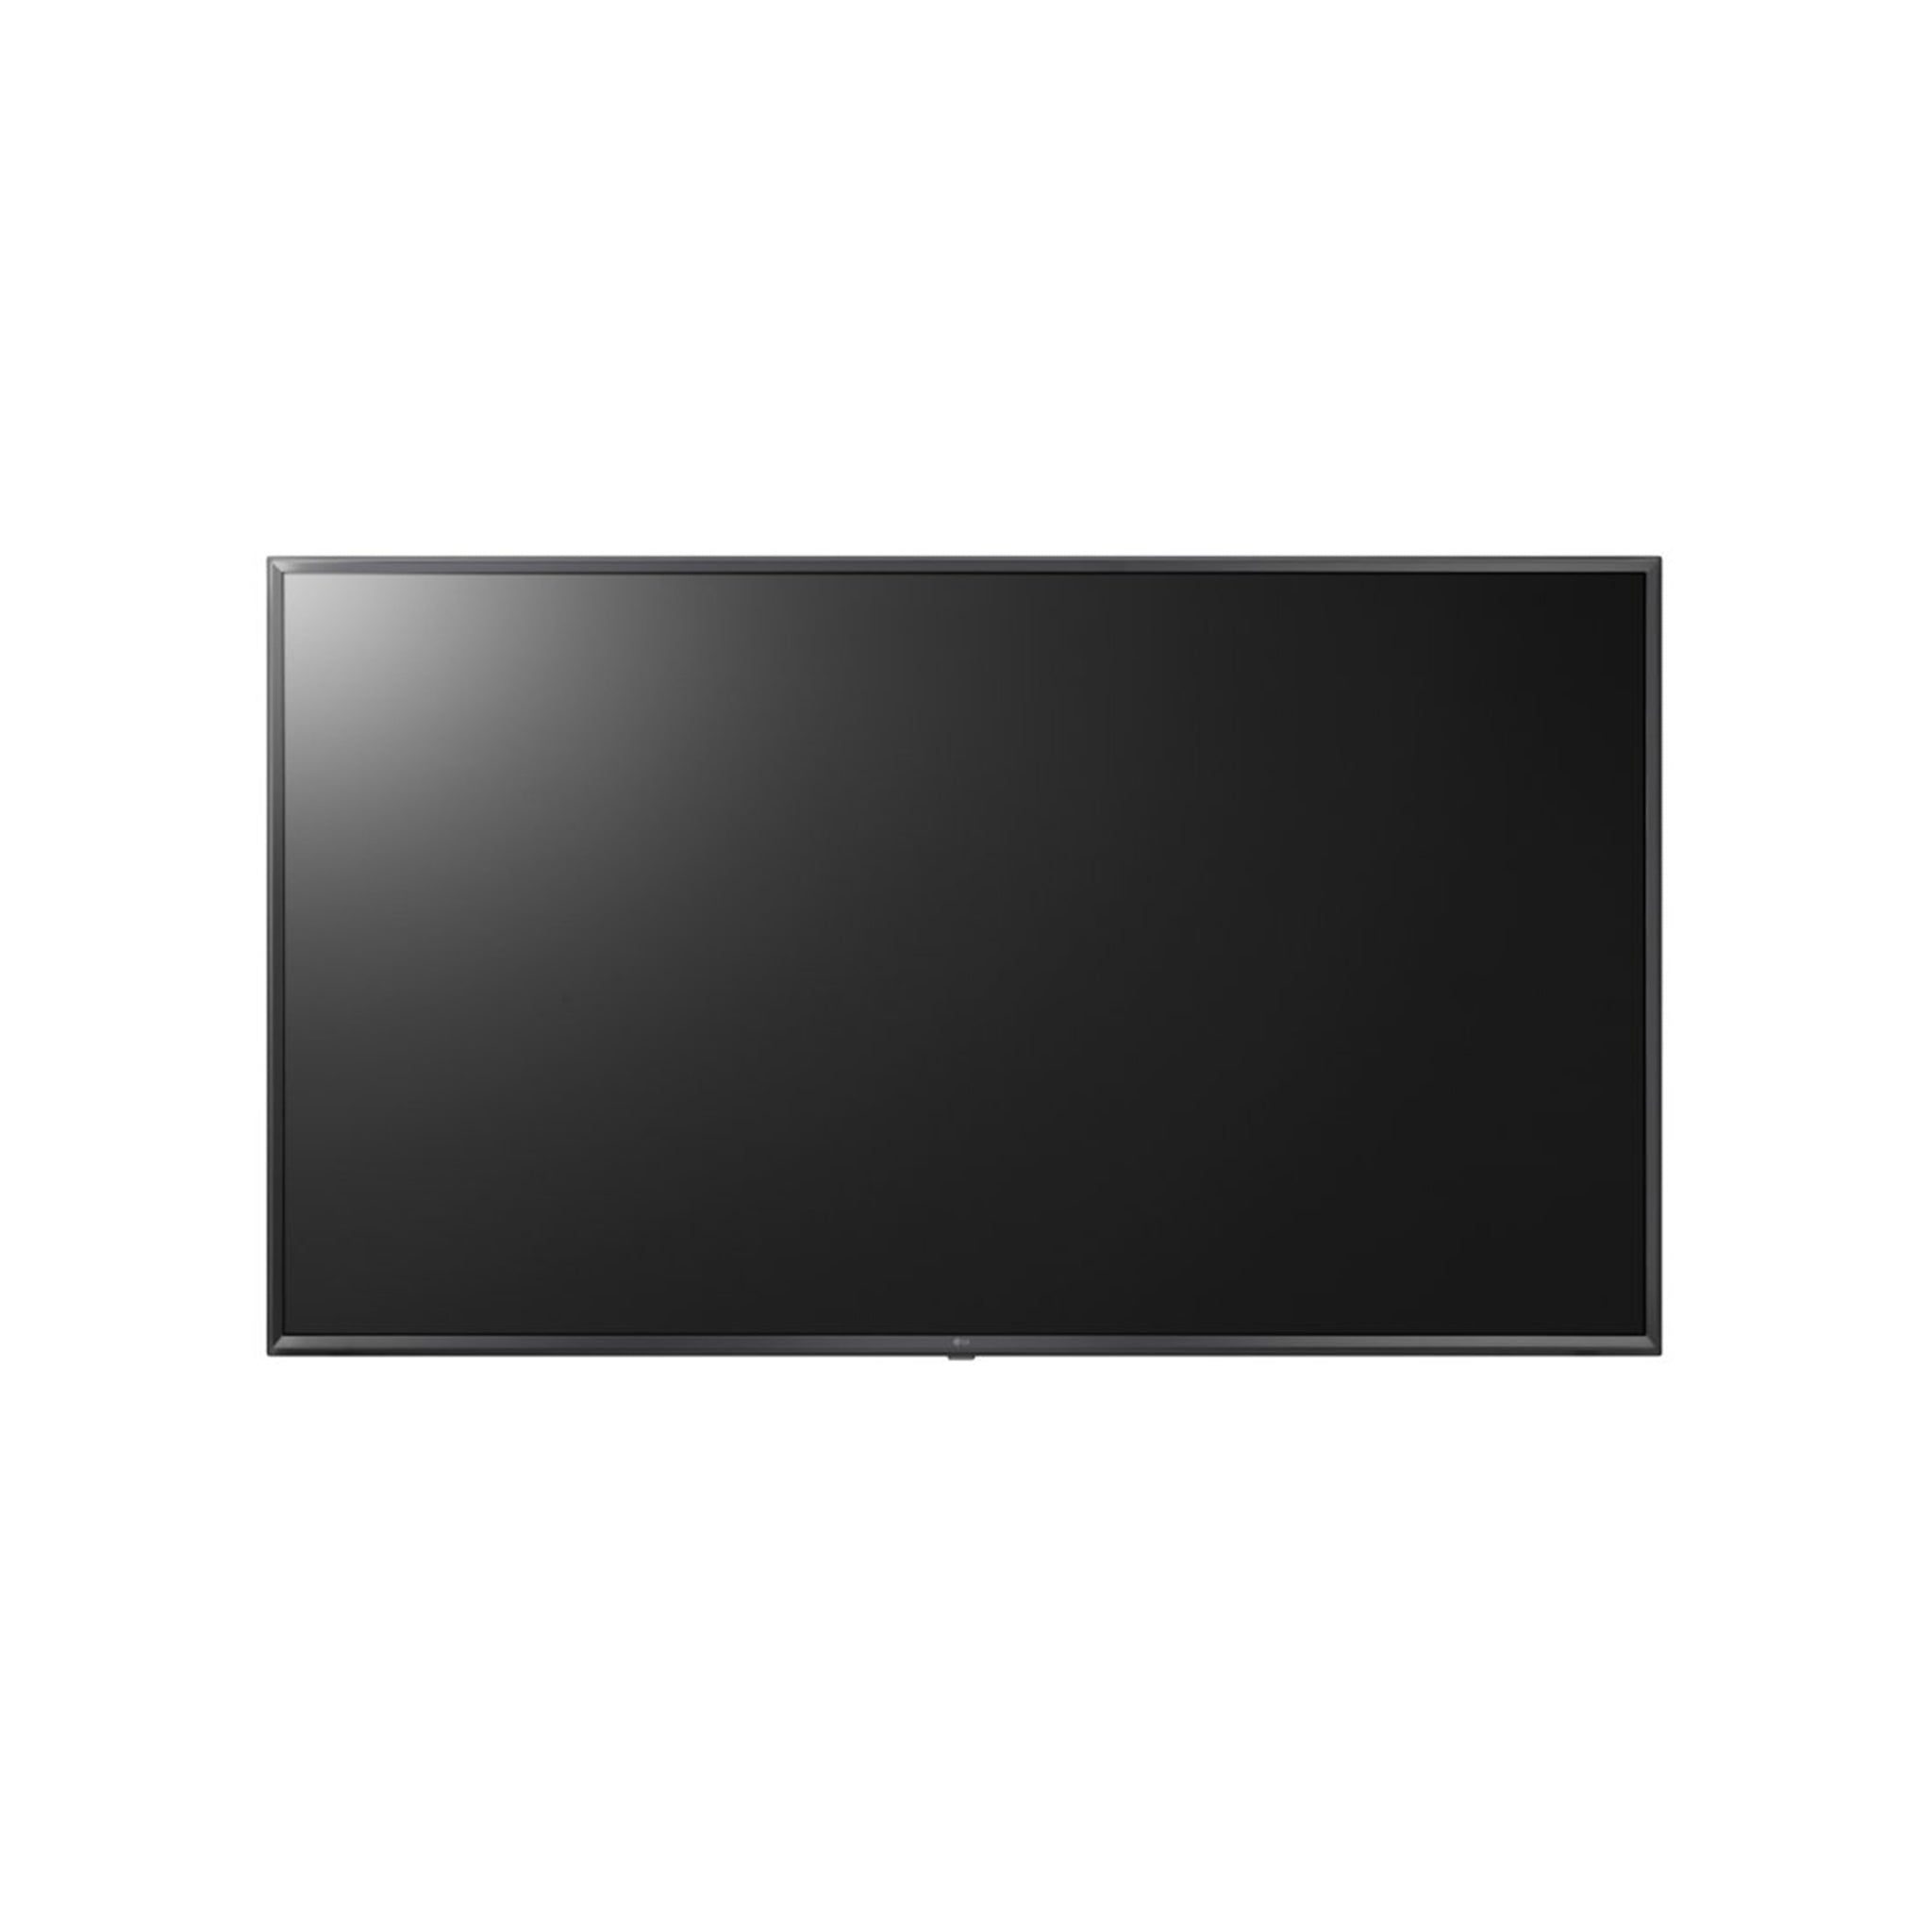 LG Ultra HD large display Commercial signage display UL3E Series - 65" / 75" / 86"